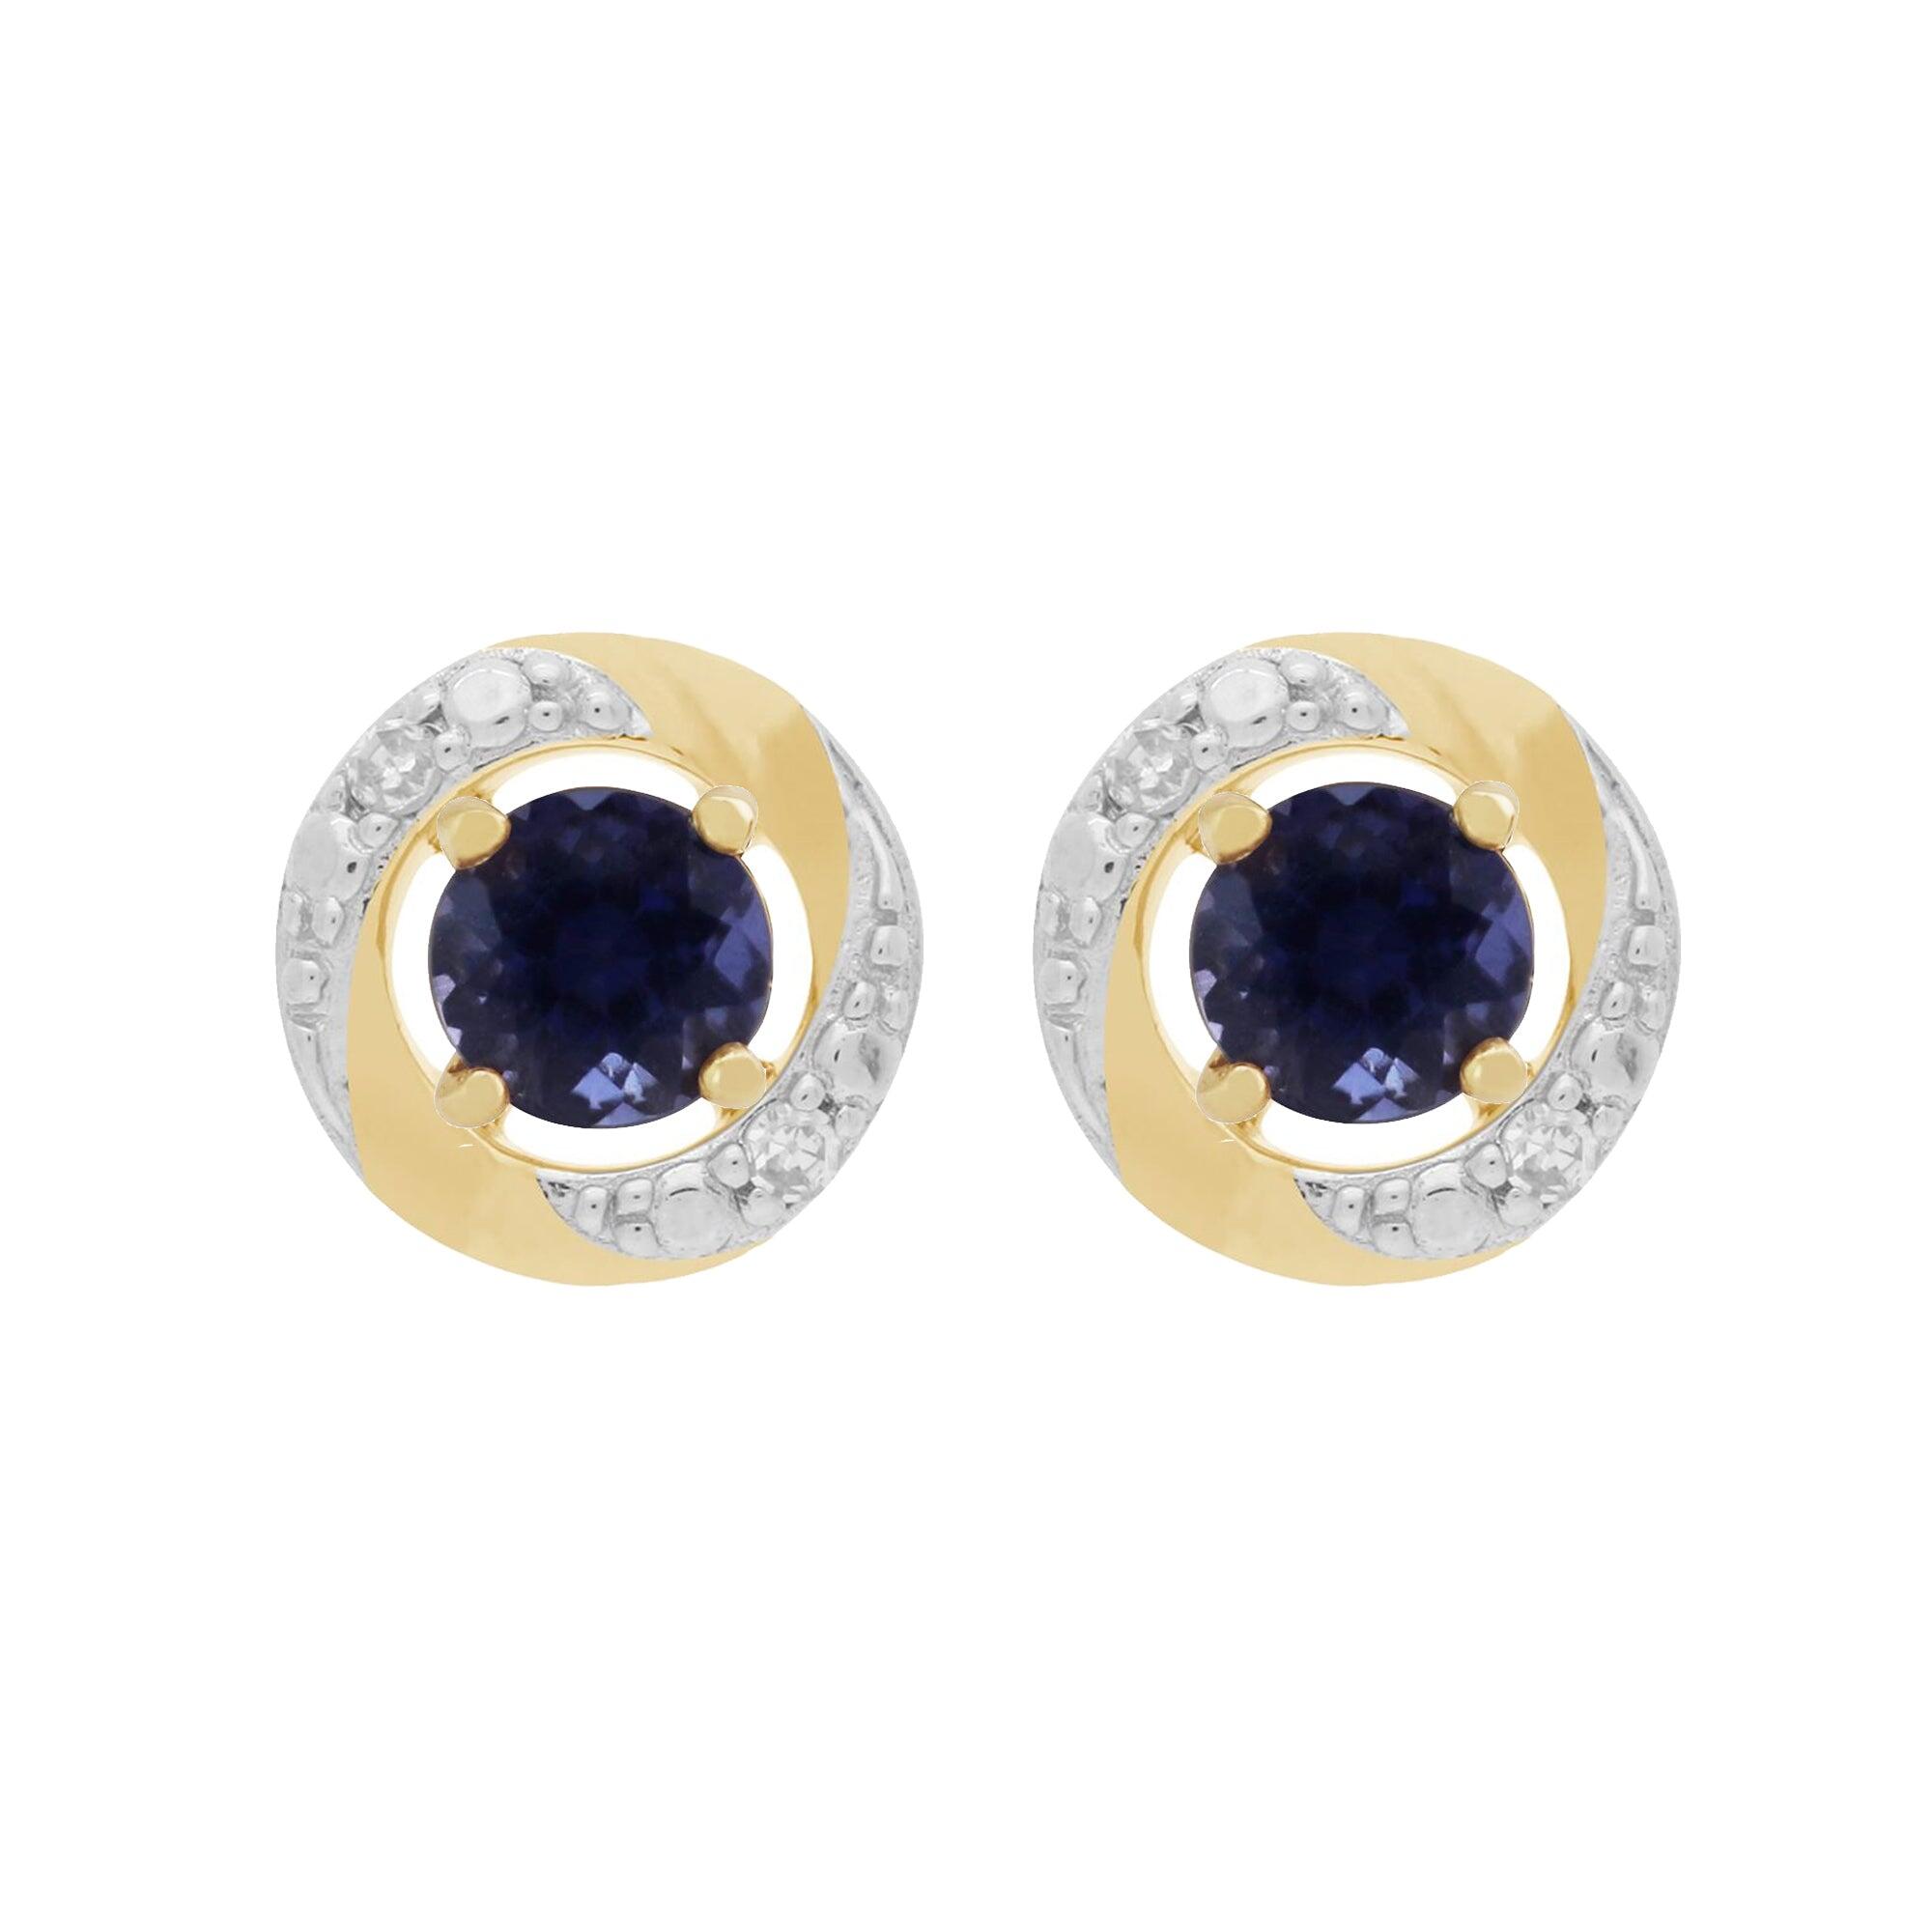 Classic Round Iolite Stud Earrings with Detachable Diamond Halo Ear Jacket in 9ct Yellow Gold